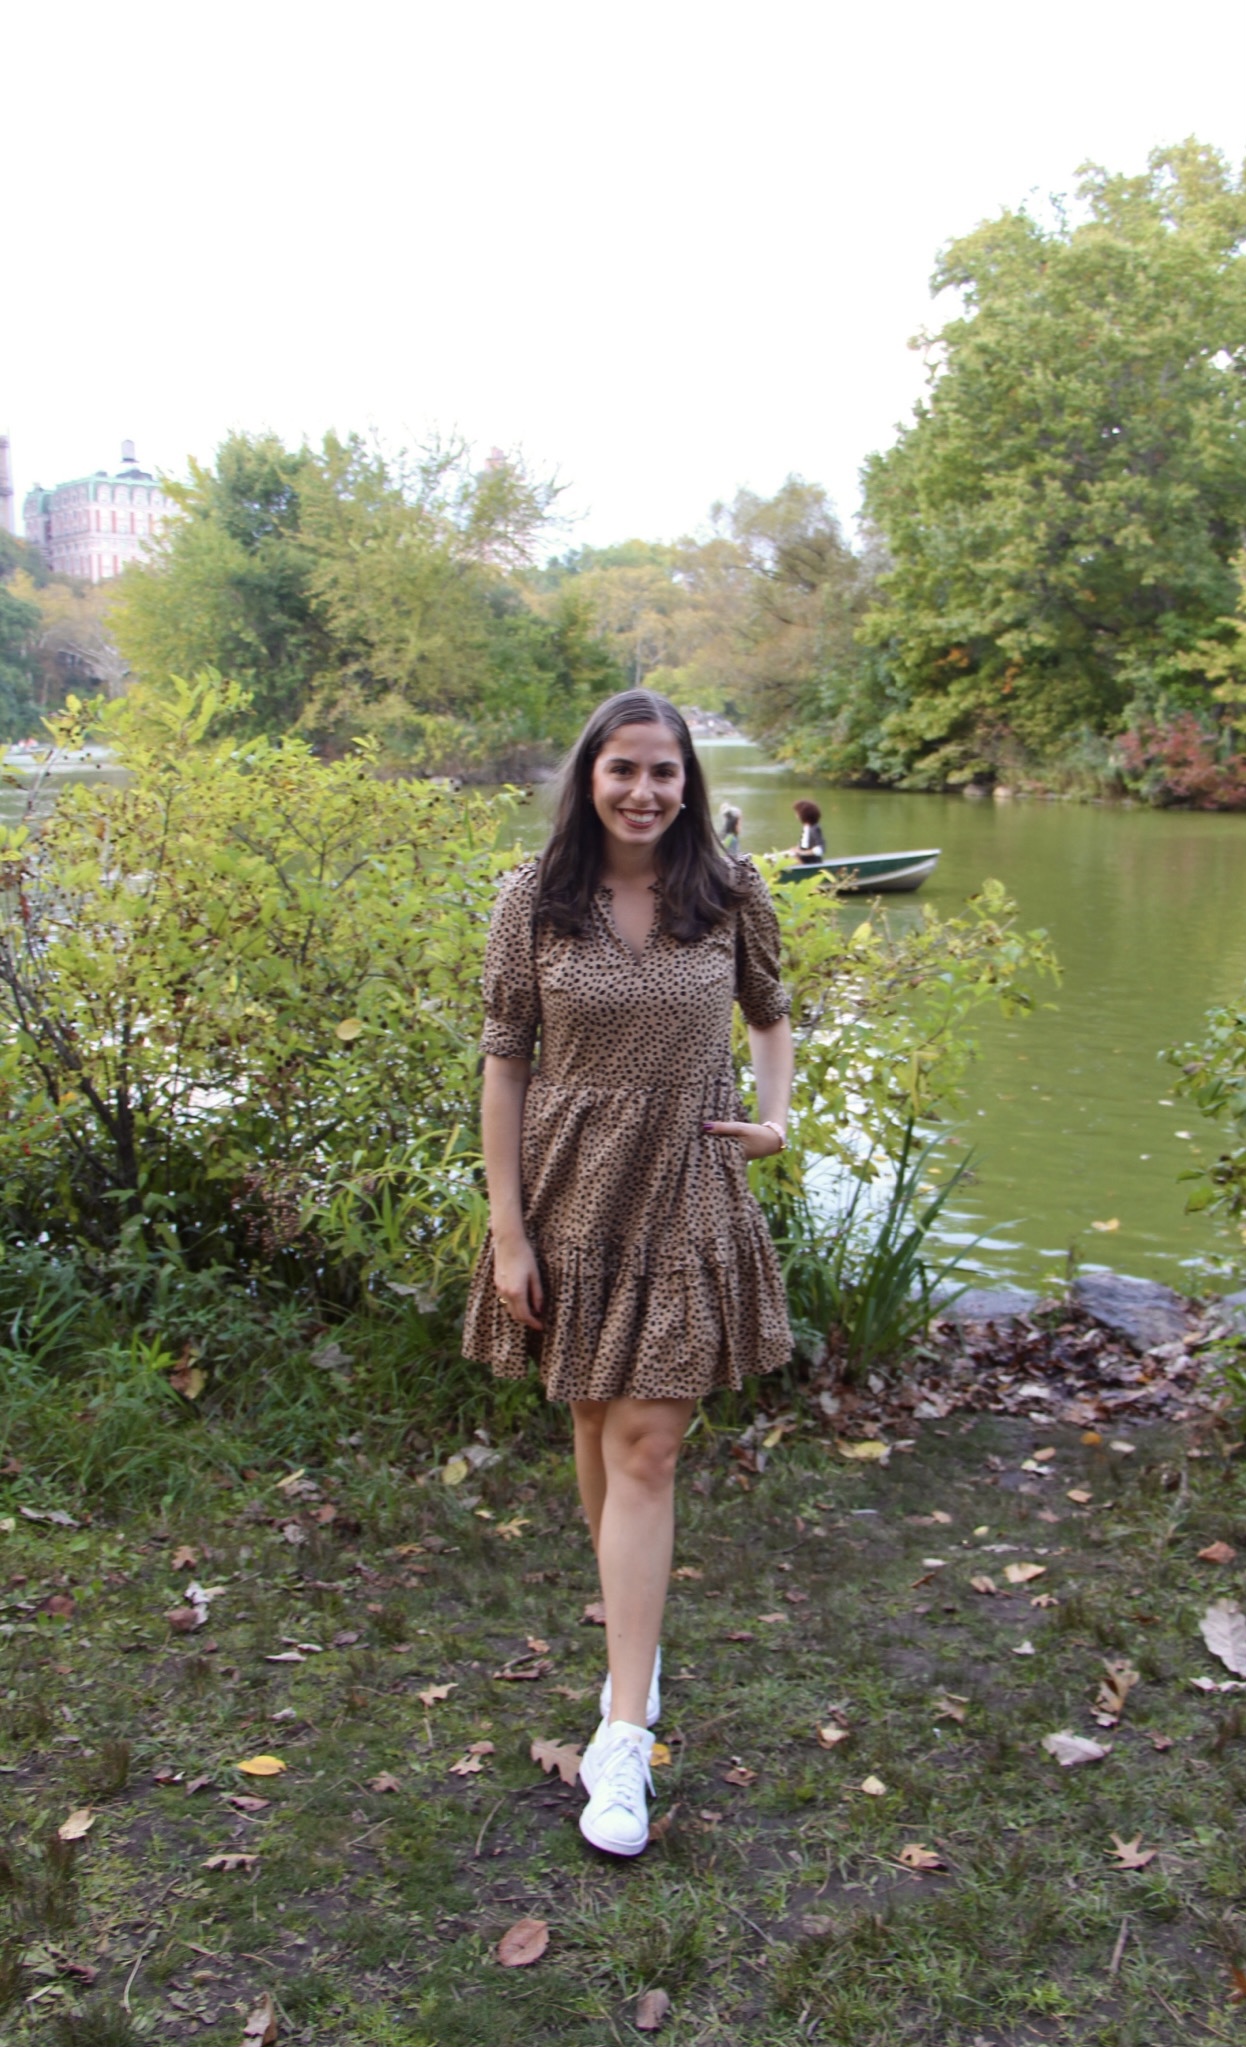 sneakers and dress, white sneaks, cheetah dress, central park, fall outfit